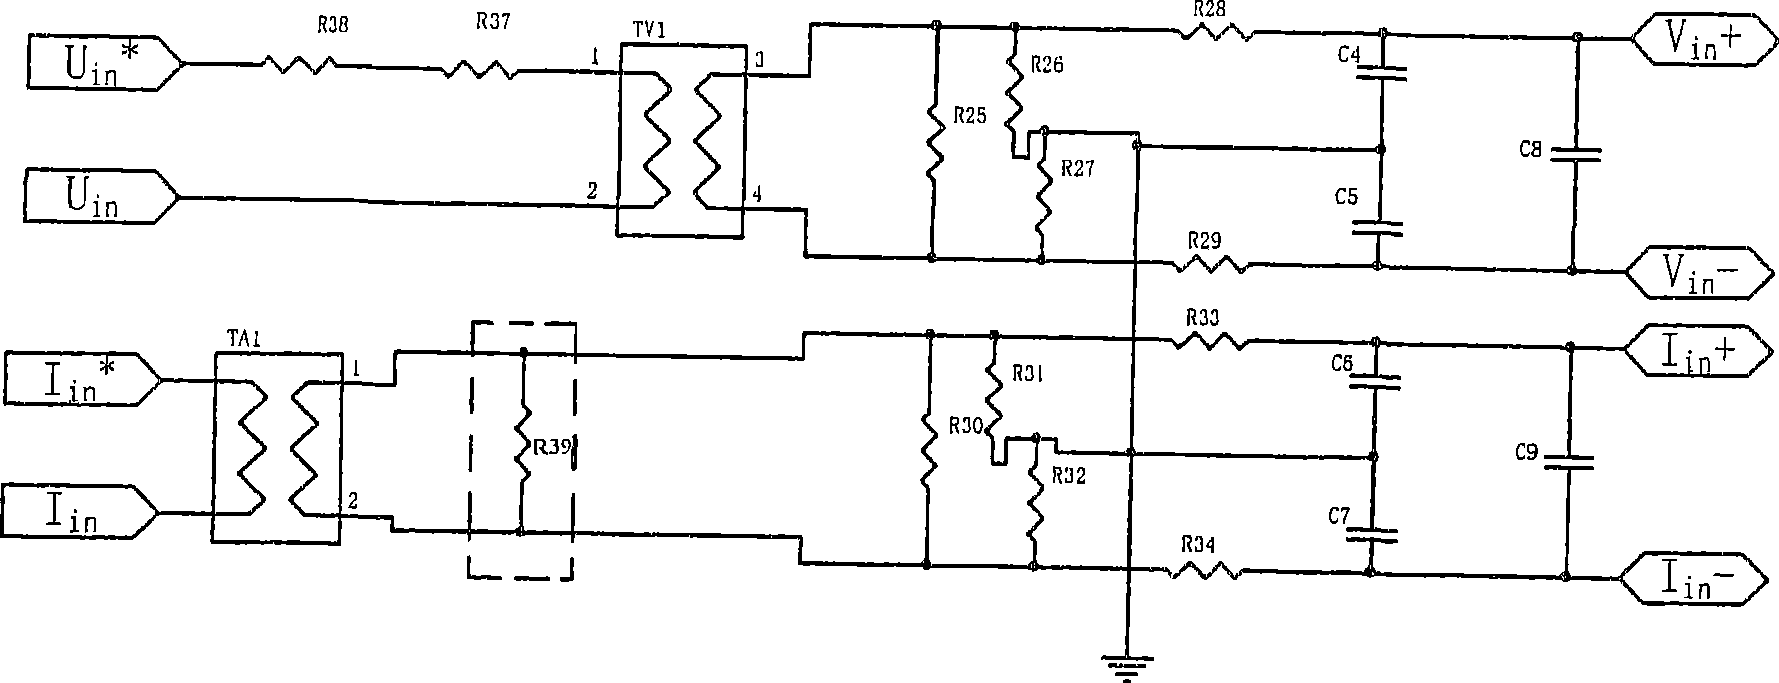 Single-phase multiple-parameter electric power instrument